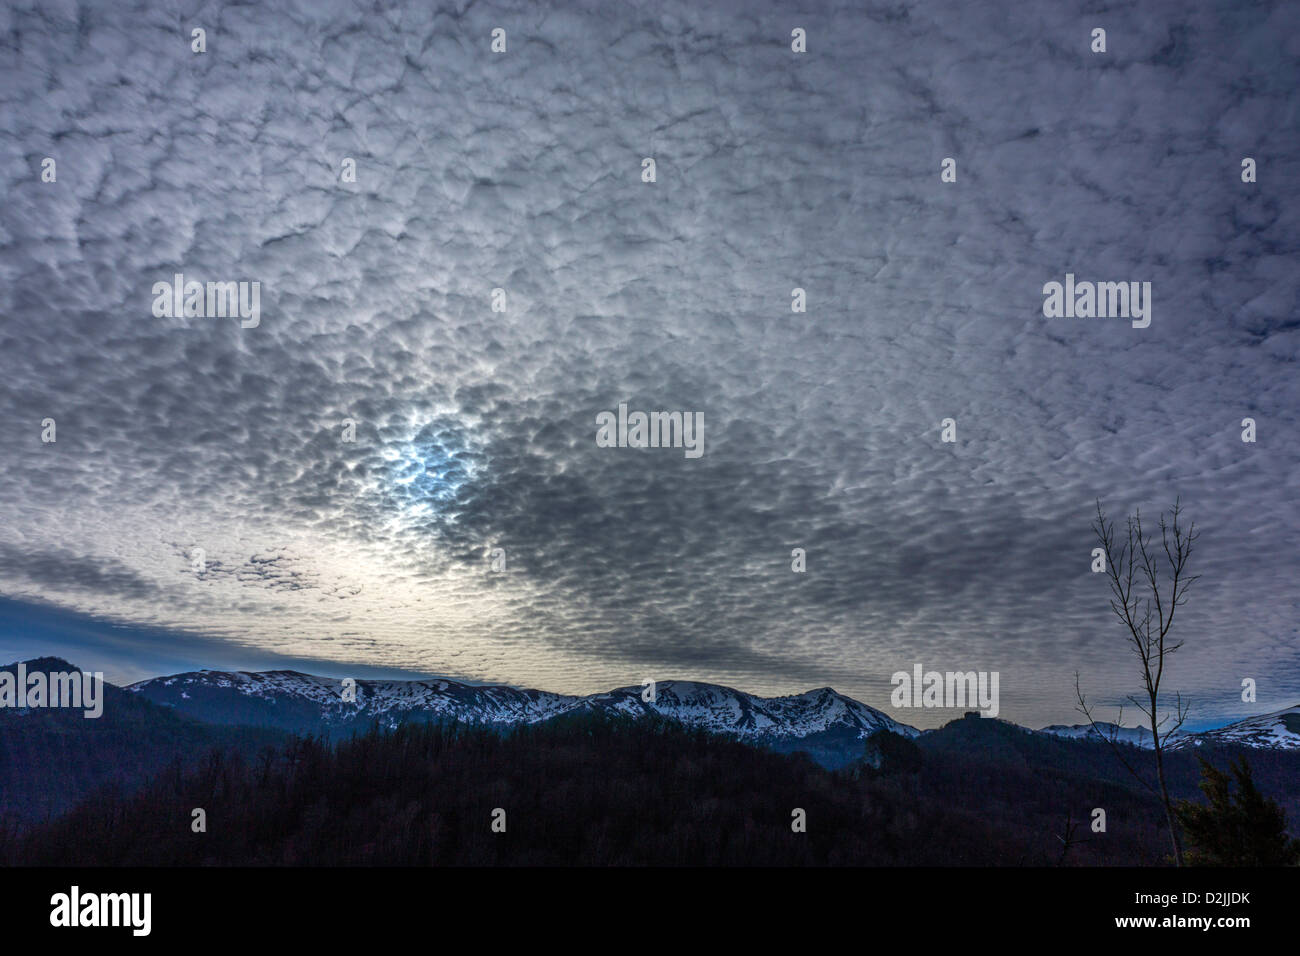 Winter mackerel sky with Altocumulus clouds and snowy mountains Stock Photo